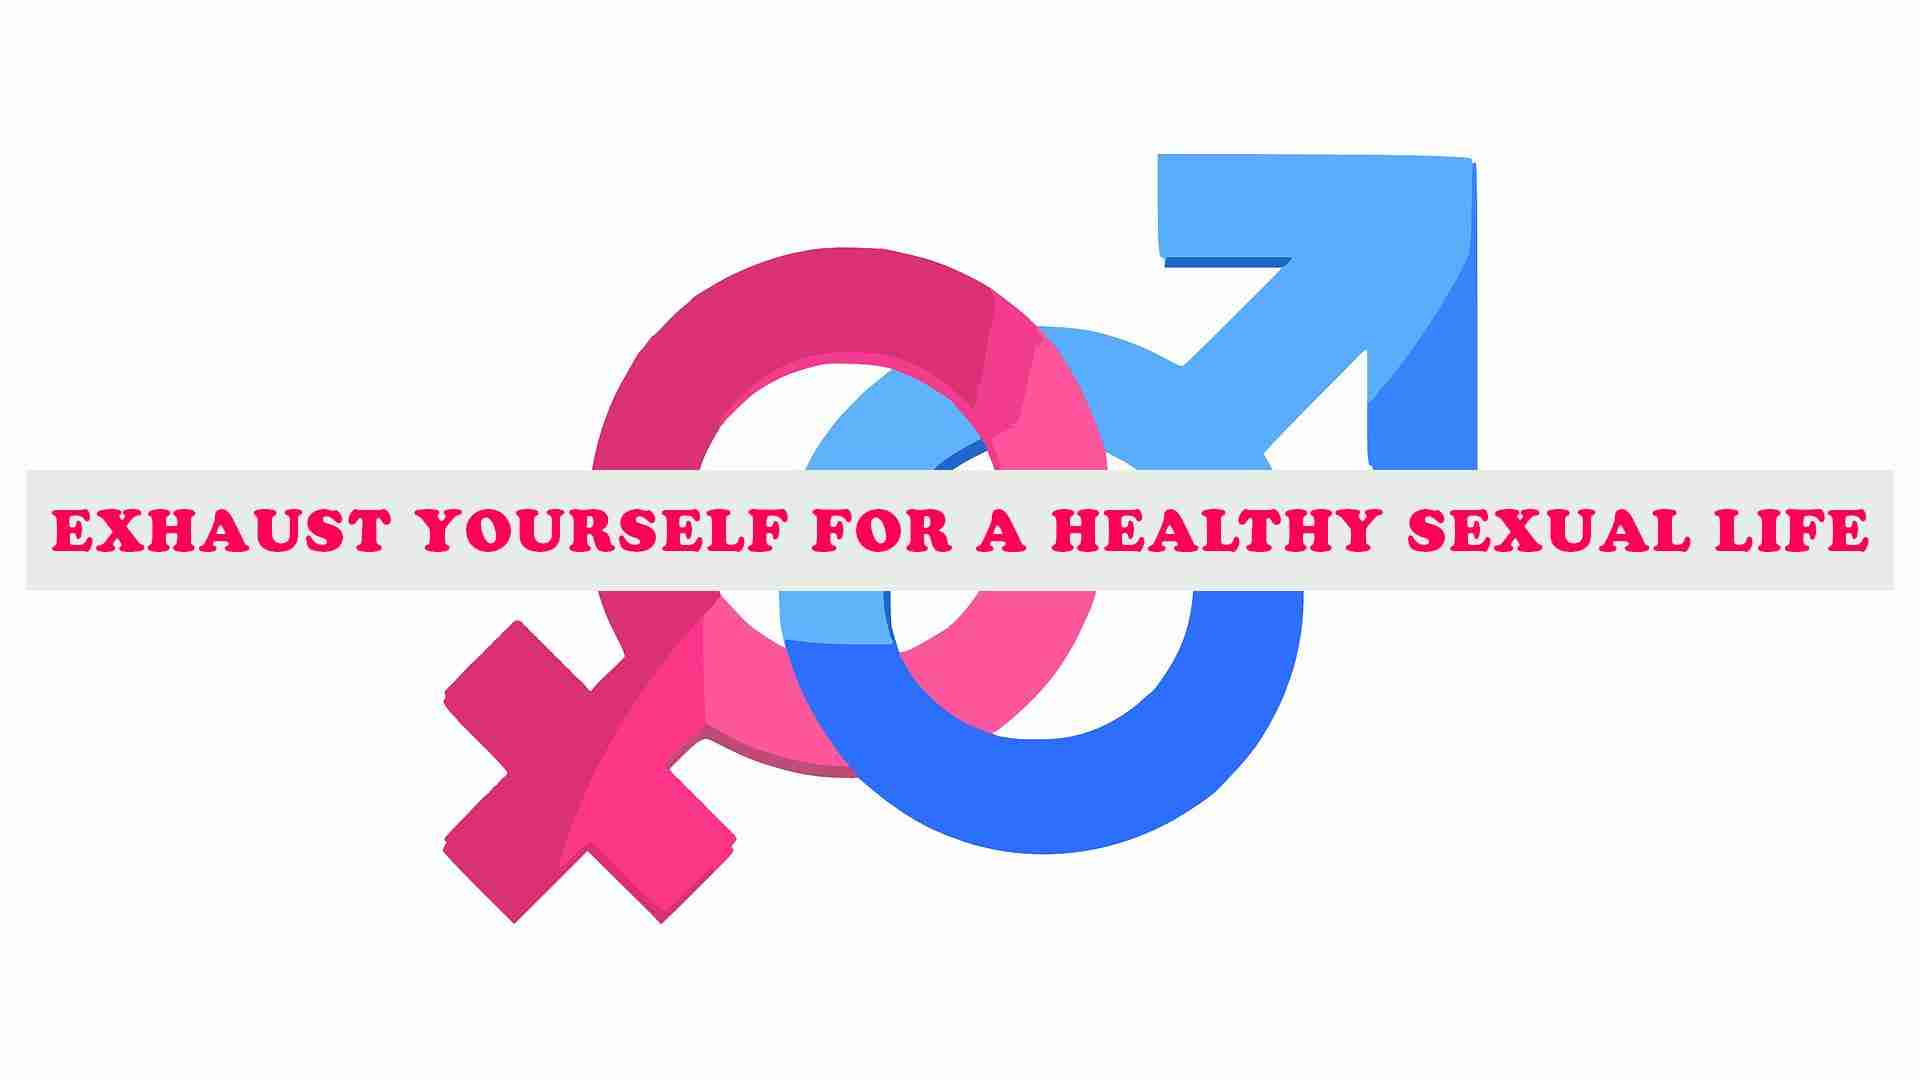 Exhaust yourself for a healthy sexual life